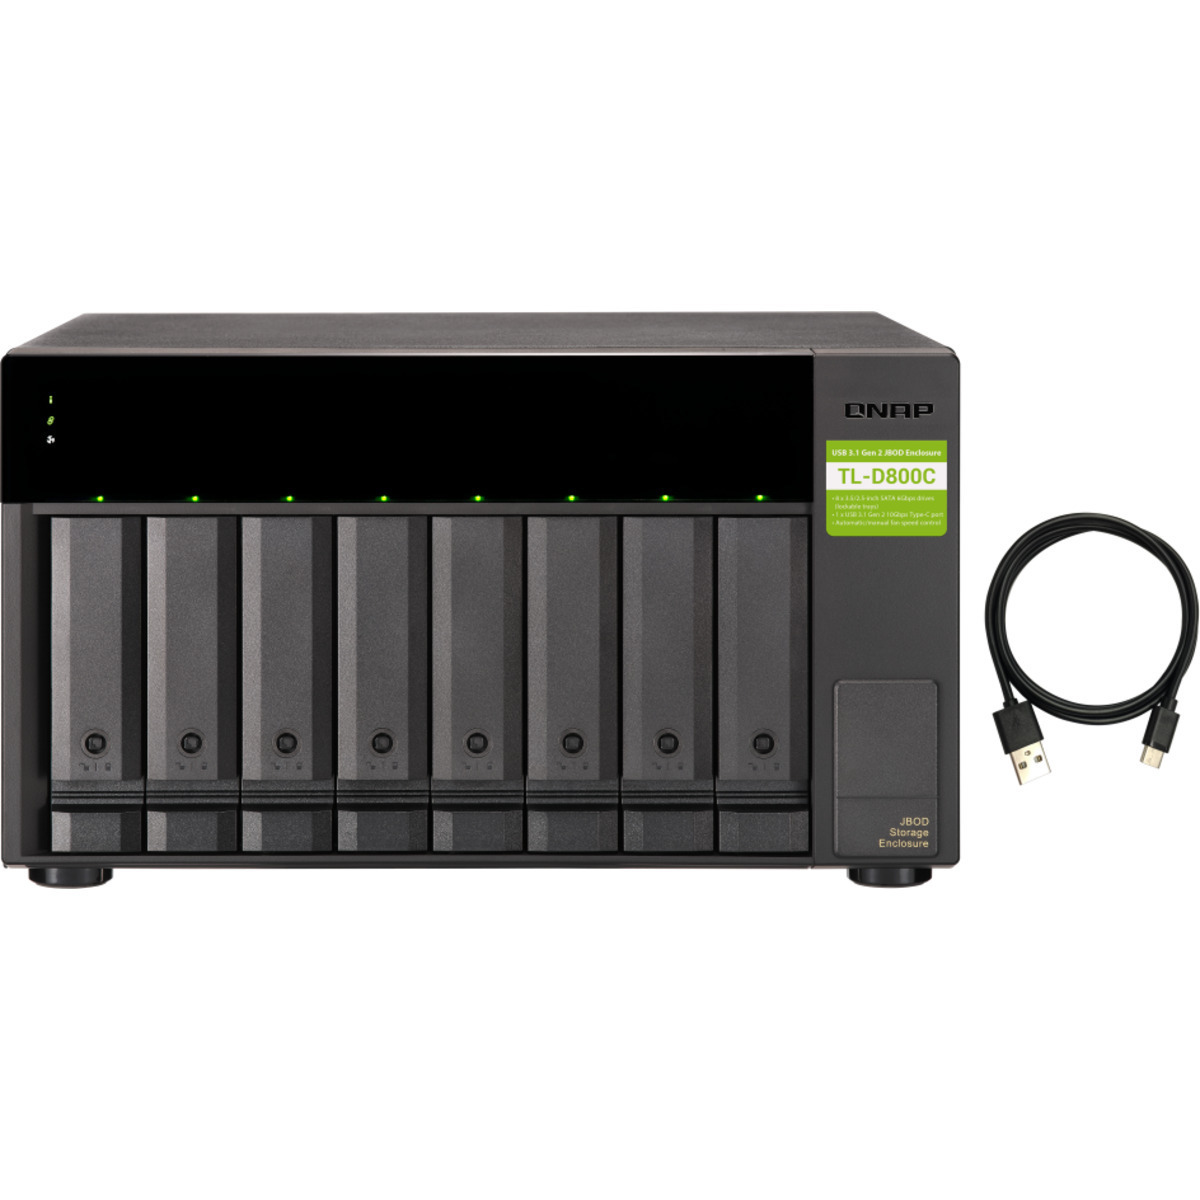 QNAP TL-D800C External Expansion Drive 120tb 8-Bay Desktop Multimedia / Power User / Business Expansion Enclosure 6x20tb Seagate IronWolf Pro ST20000NT001 3.5 7200rpm SATA 6Gb/s HDD NAS Class Drives Installed - Burn-In Tested TL-D800C External Expansion Drive